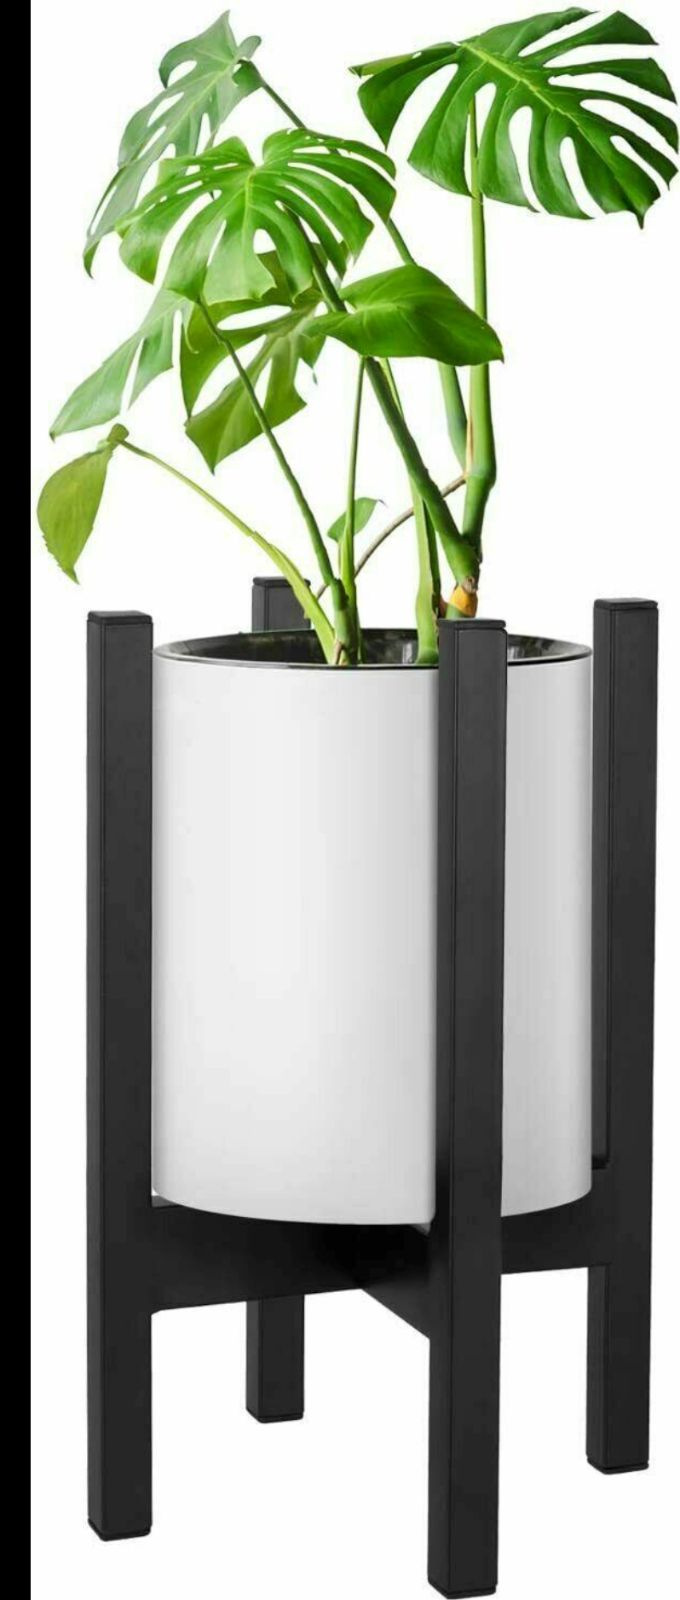 Viewee 10 Inch Metal Plant Stand (brand New) Tzhj 03 | Ebay With 10 Inch Plant Stands (View 12 of 15)